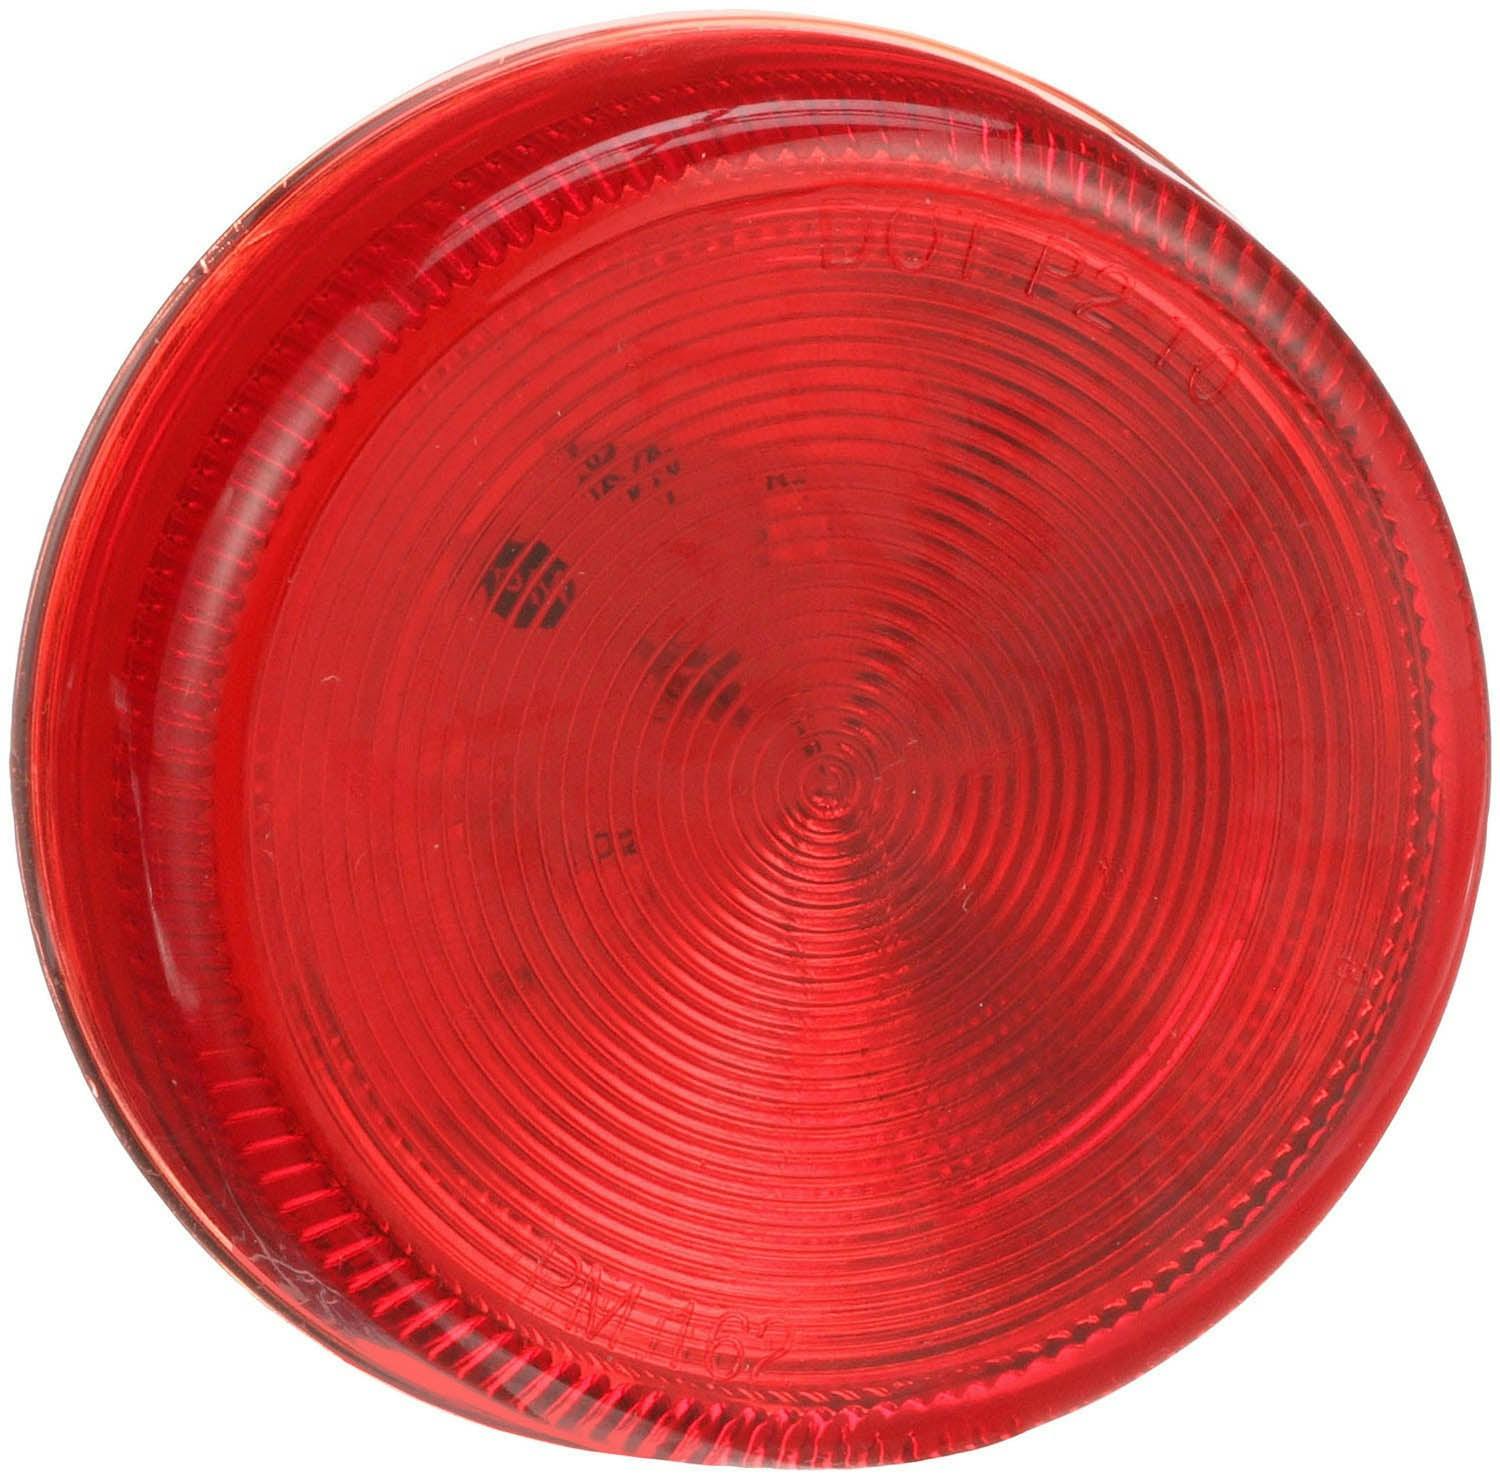 LED Marker/ Clearance, P2, Round, AMP, 2.5", red (Pack of 12) - 162R_c793587e-7f57-4954-87ca-d1b9227dff19